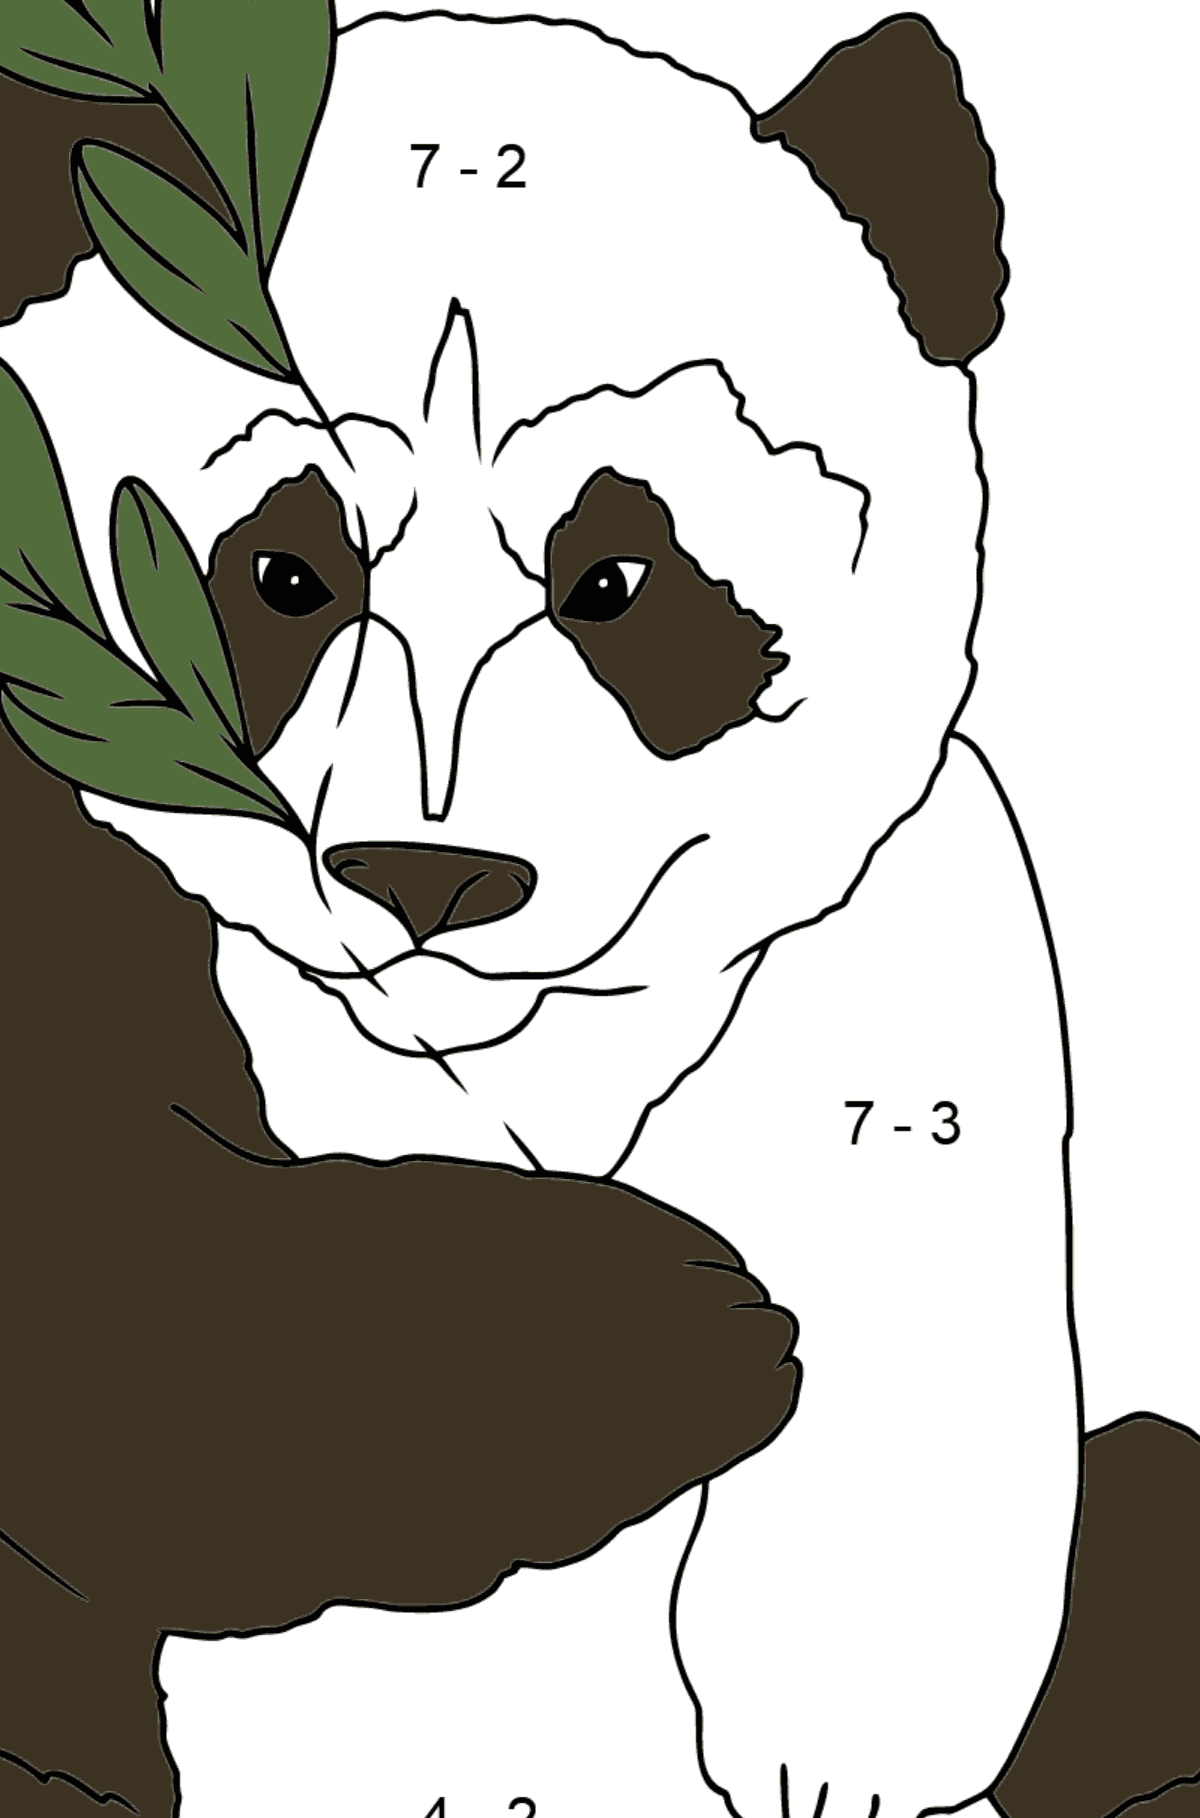 baby-panda-math-coloring-page-math-color-worksheets-sumnermuseumdc-org-children-get-to-learn